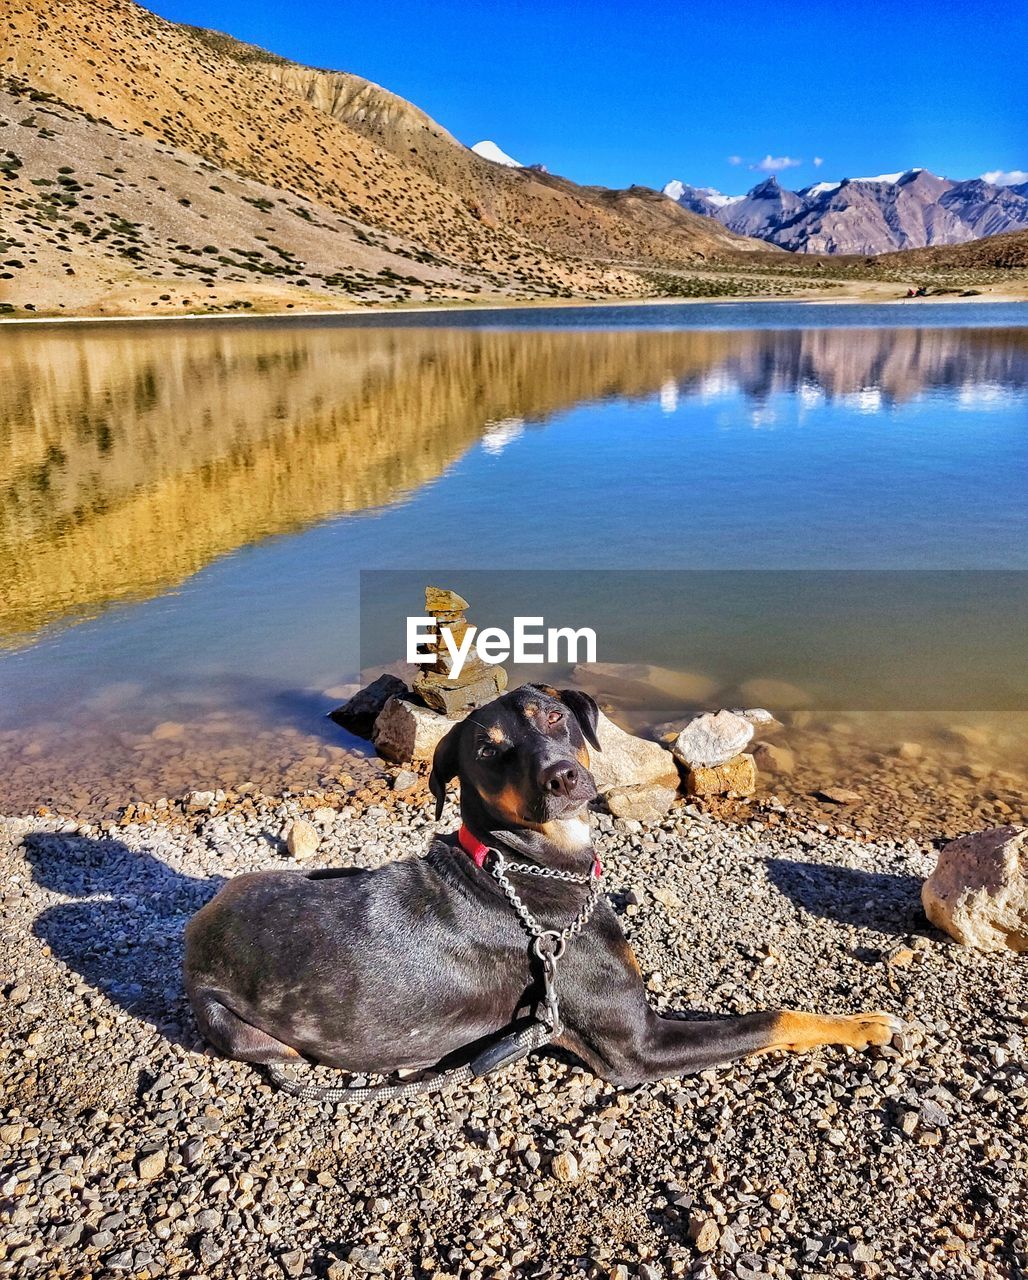 View of dog at lakeshore in high altitude desert surrounded by mountain peaks some with snow